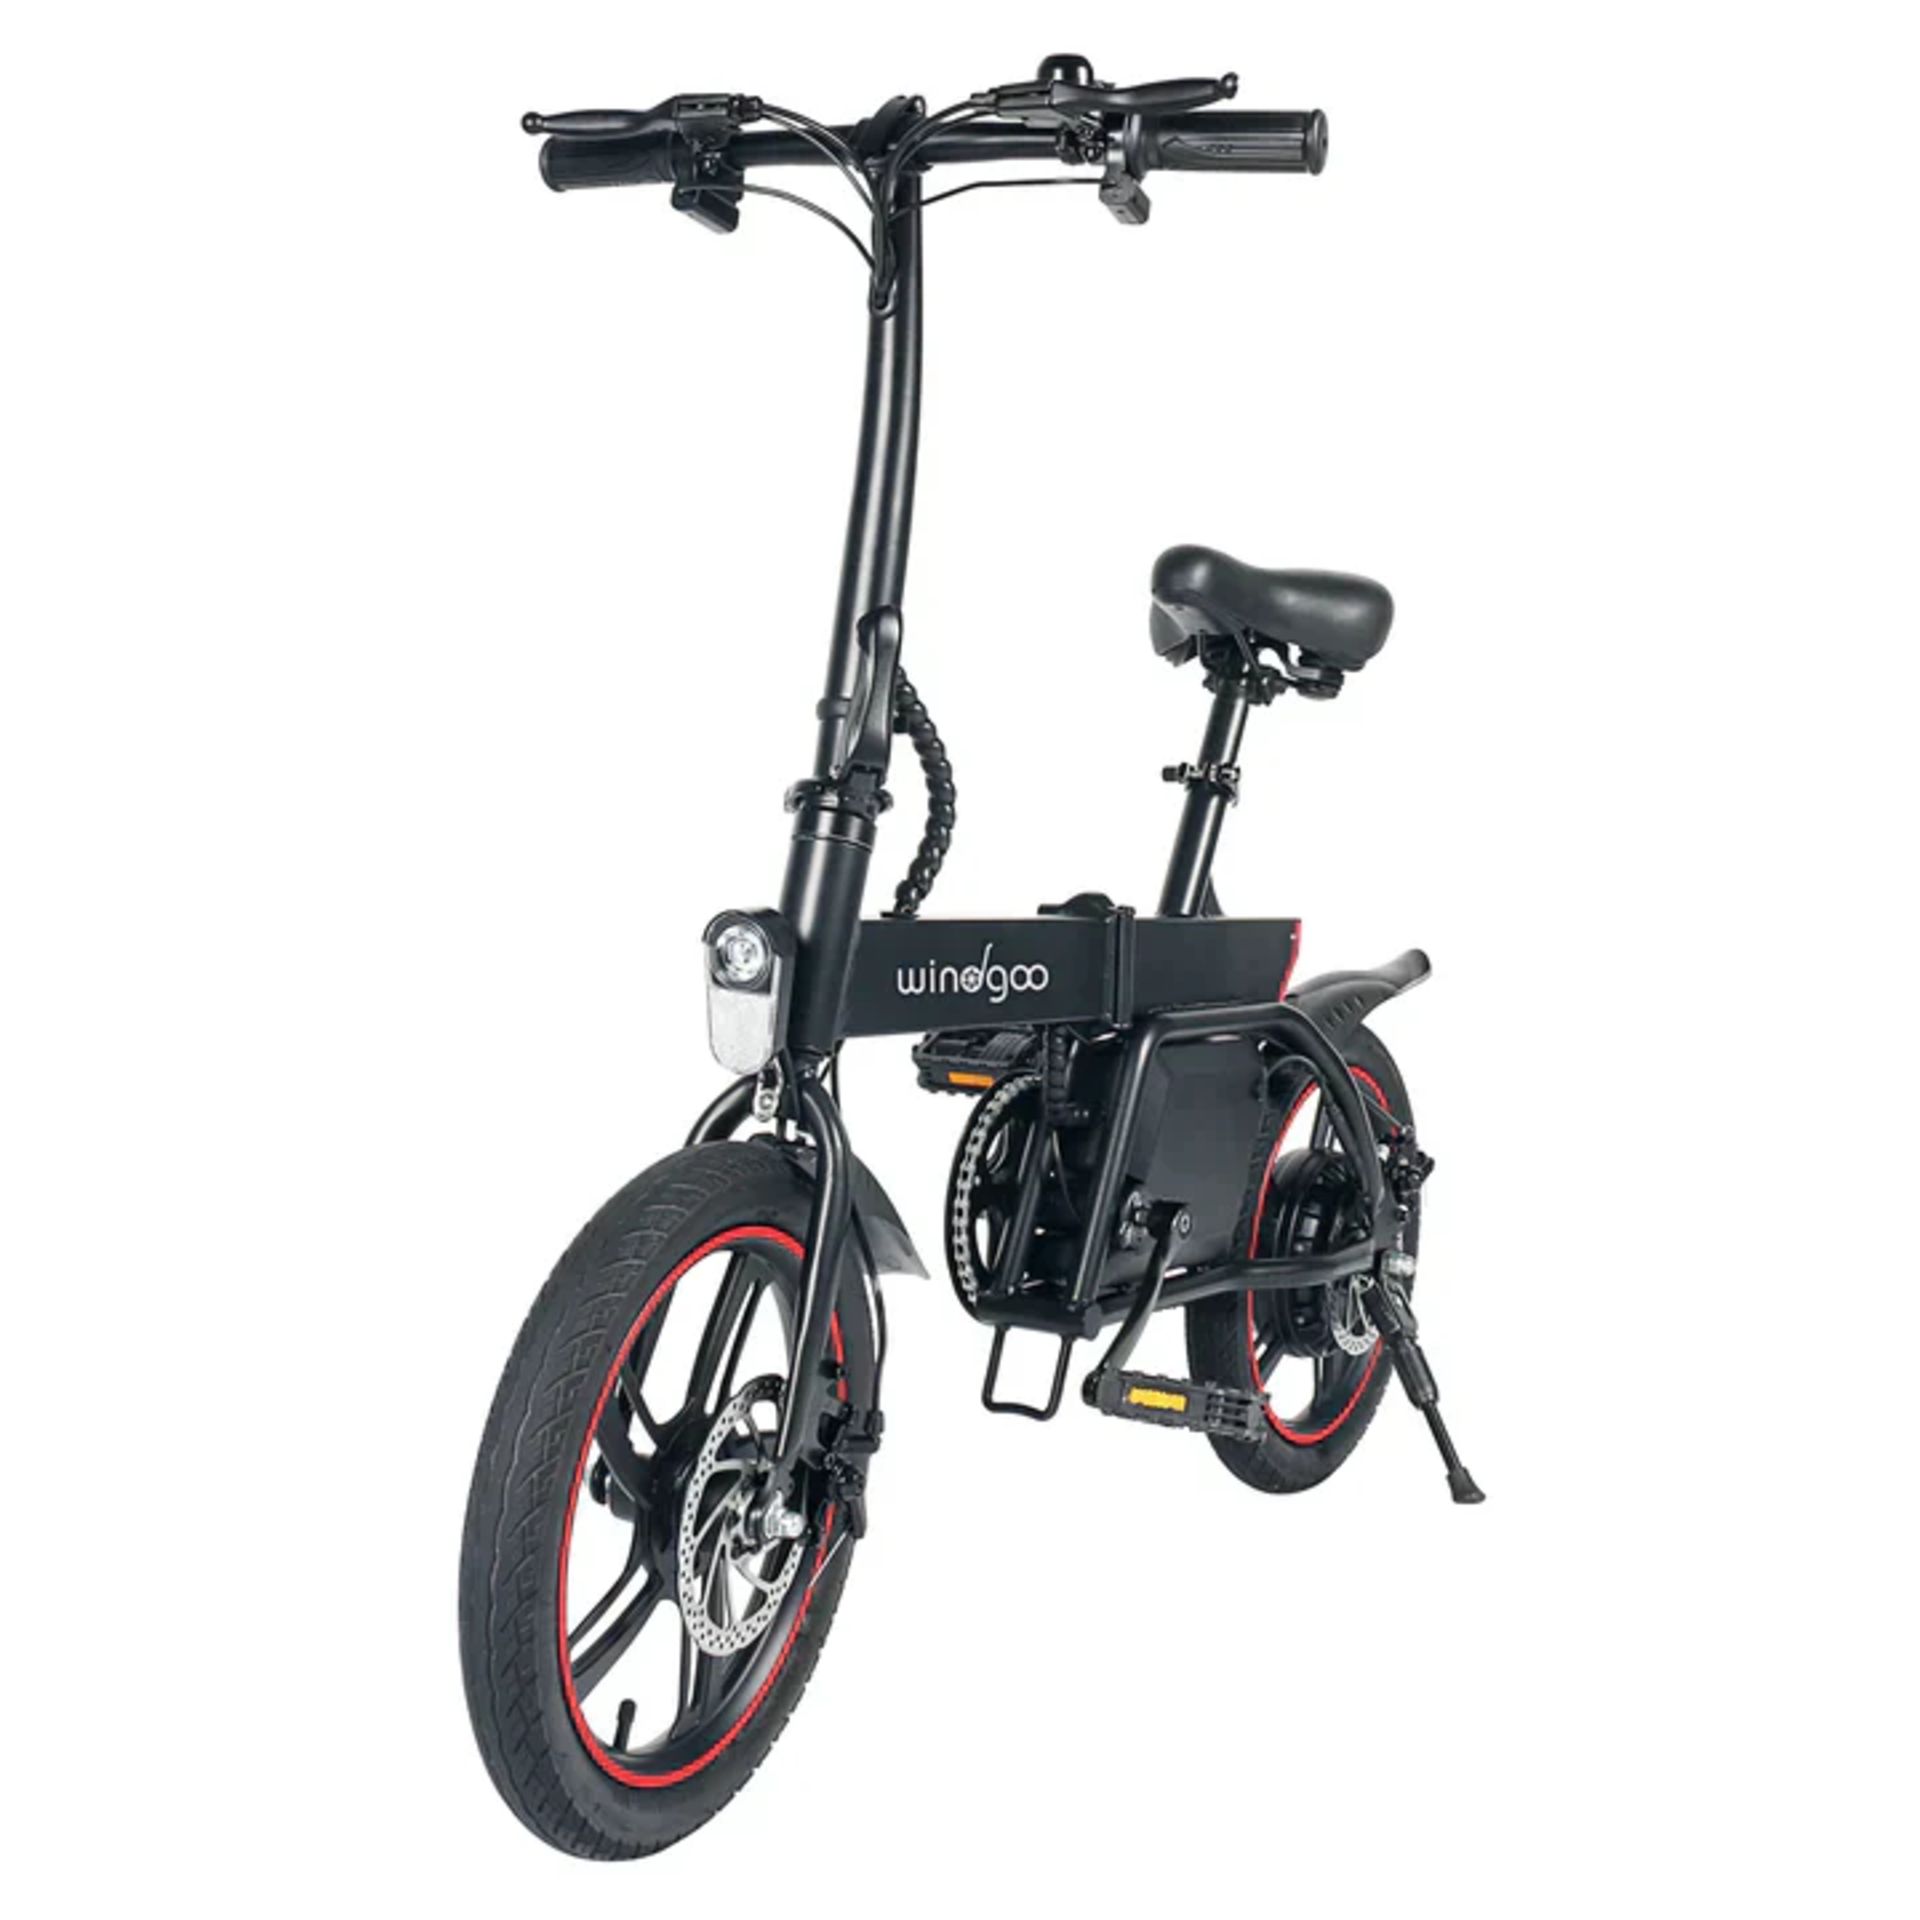 Windgoo B20 Pro Electric Bike. RRP £1,100.99. With 16-inch-wide tires and a frame of upgraded - Image 5 of 7